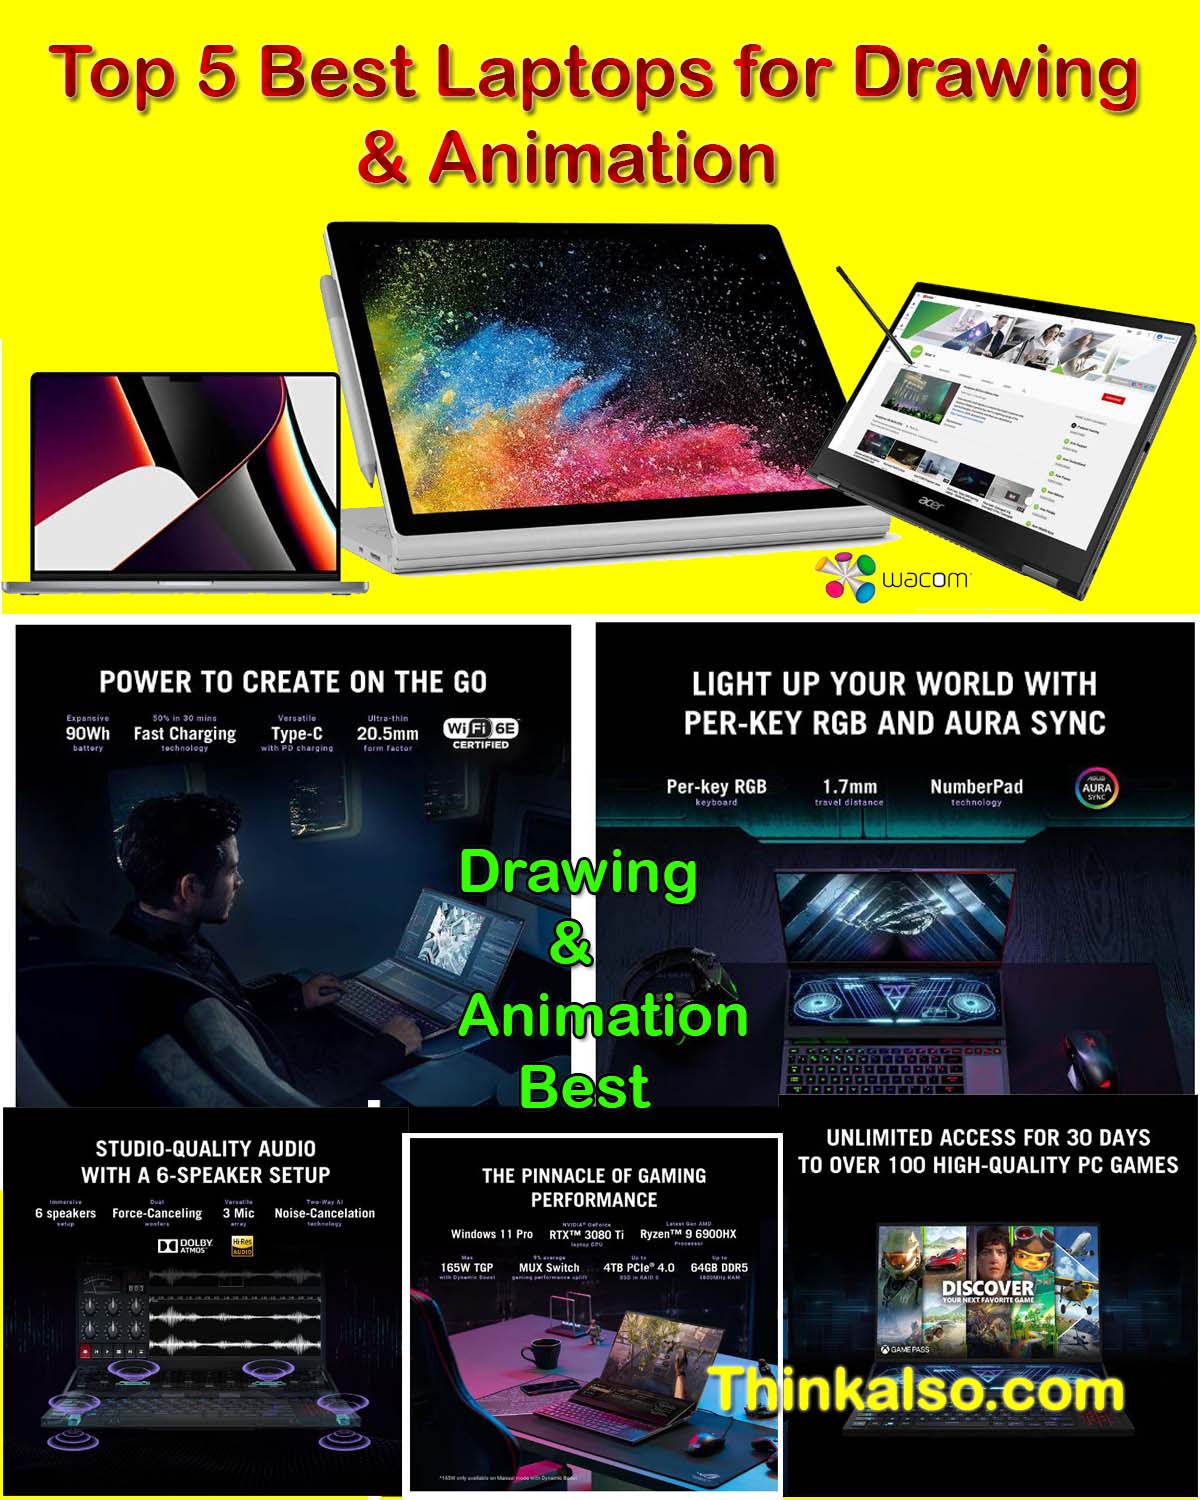 Best Laptop for Drawing and Animation Best Laptops for Drawing and Animation Best Laptop for Animation Best Laptops for Animation